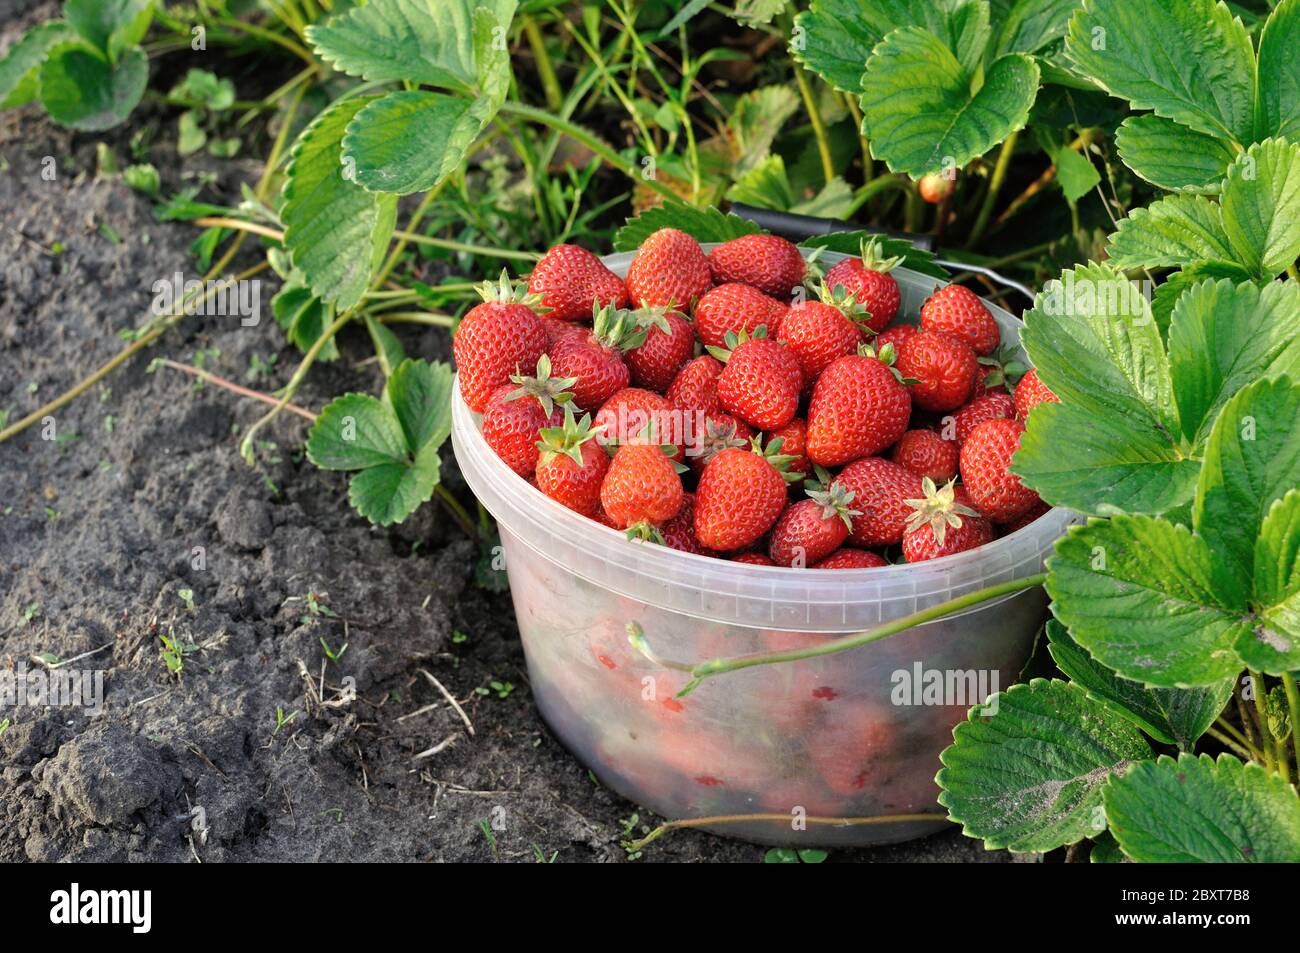 close-up of fresh ripe strawberries after harvesting in the garden, natural condition Stock Photo